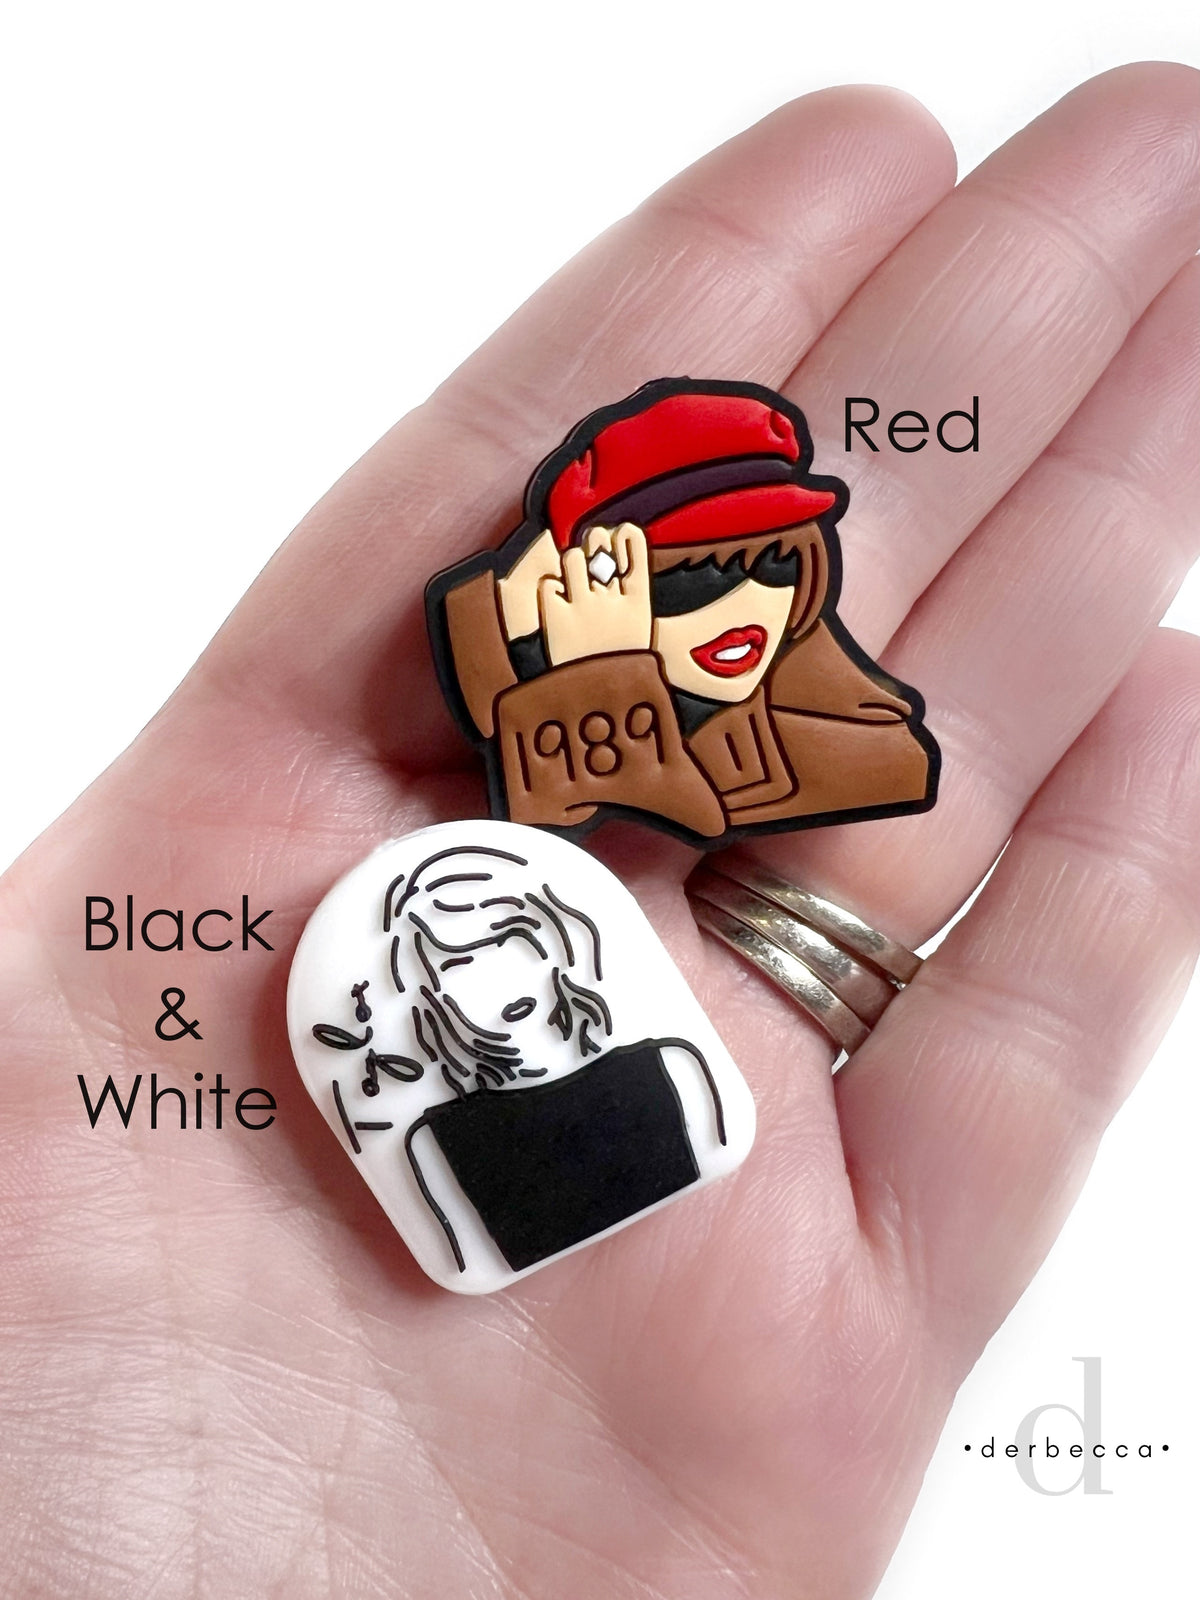 Taylor Swift Silicone Focal Bead Options: Black & White Taylor or Brown & Red 1989 Album